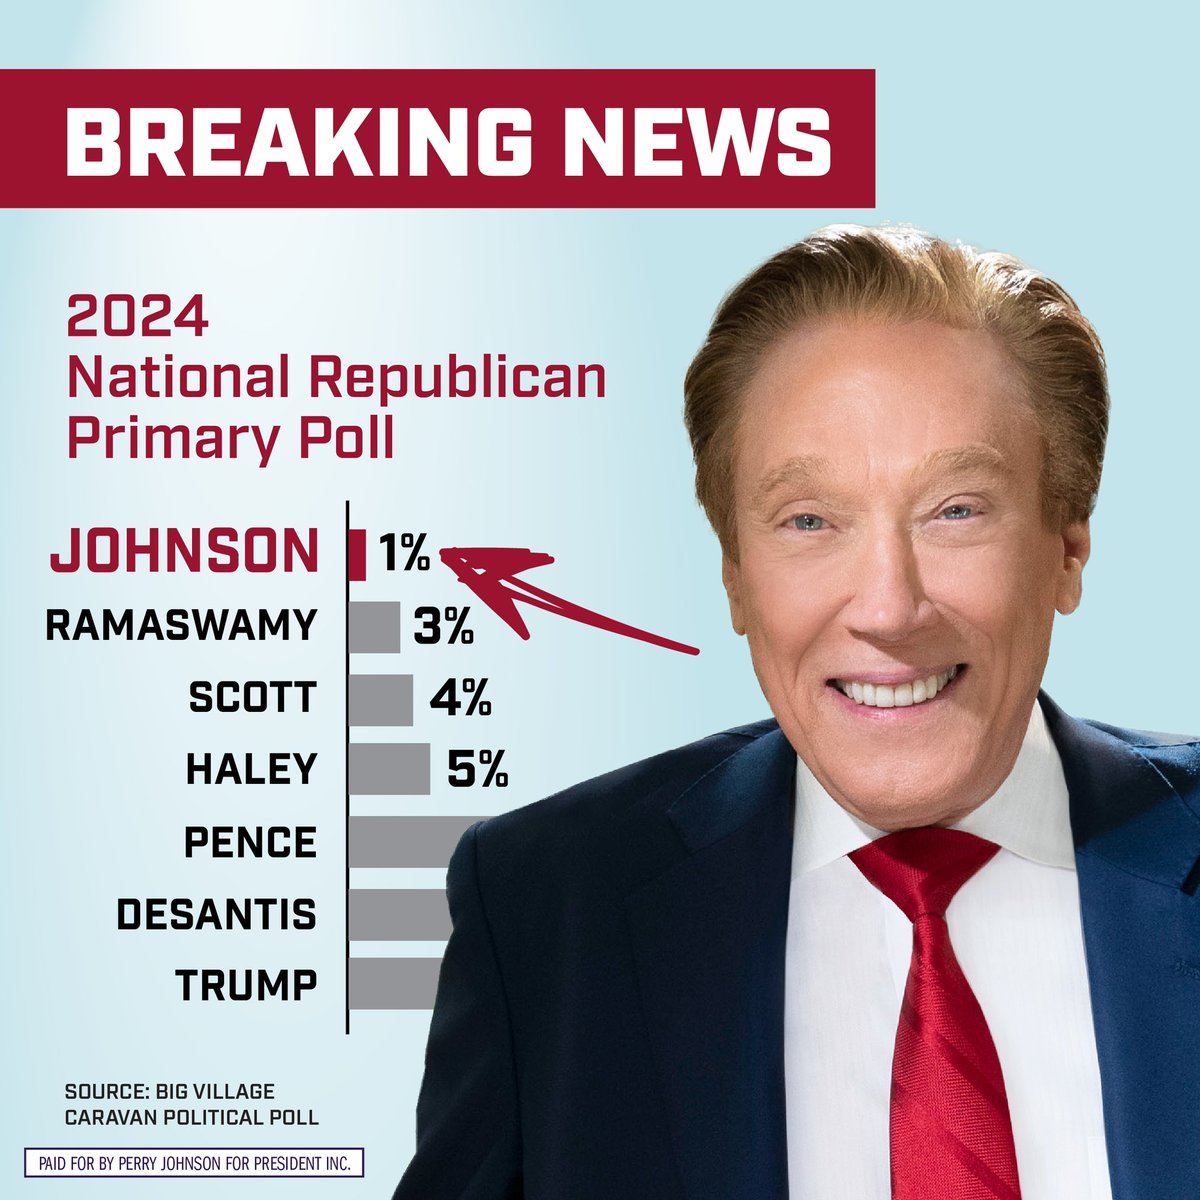 We are now breaking through in national polling & meeting the 1% threshold needed to get into the RNC debates.  Now we just need 40k donors to get on that stage & bring attention to our country’s addiction to debt & spending YOUR money!

Donate $1 ➡️ perryjohnson.com/donate